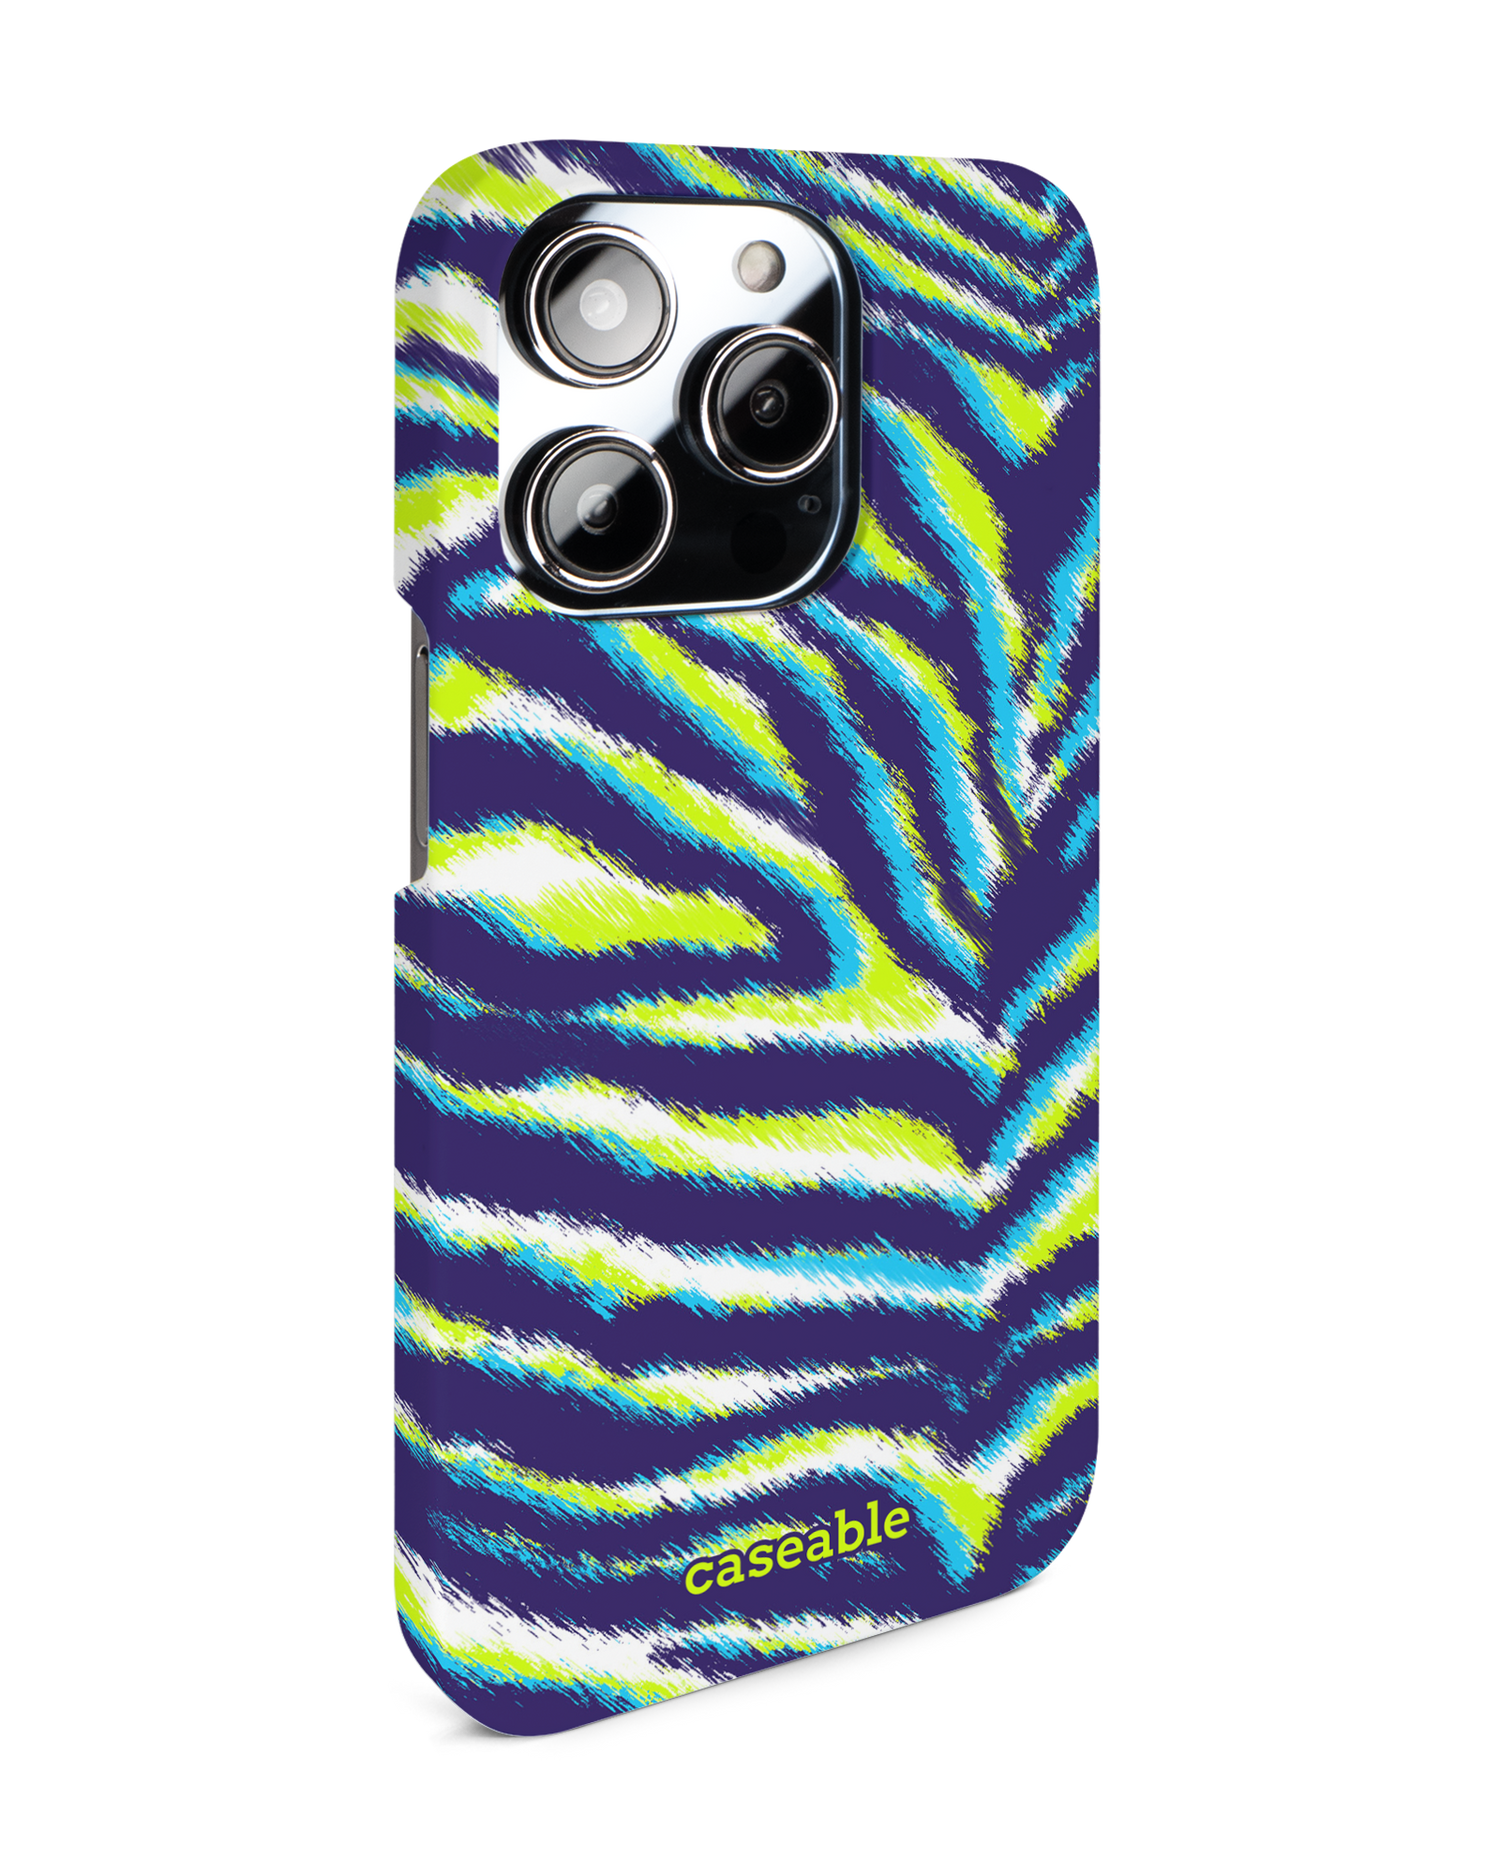 Neon Zebra Hard Shell Phone Case for Apple iPhone 14 Pro: View from the left side